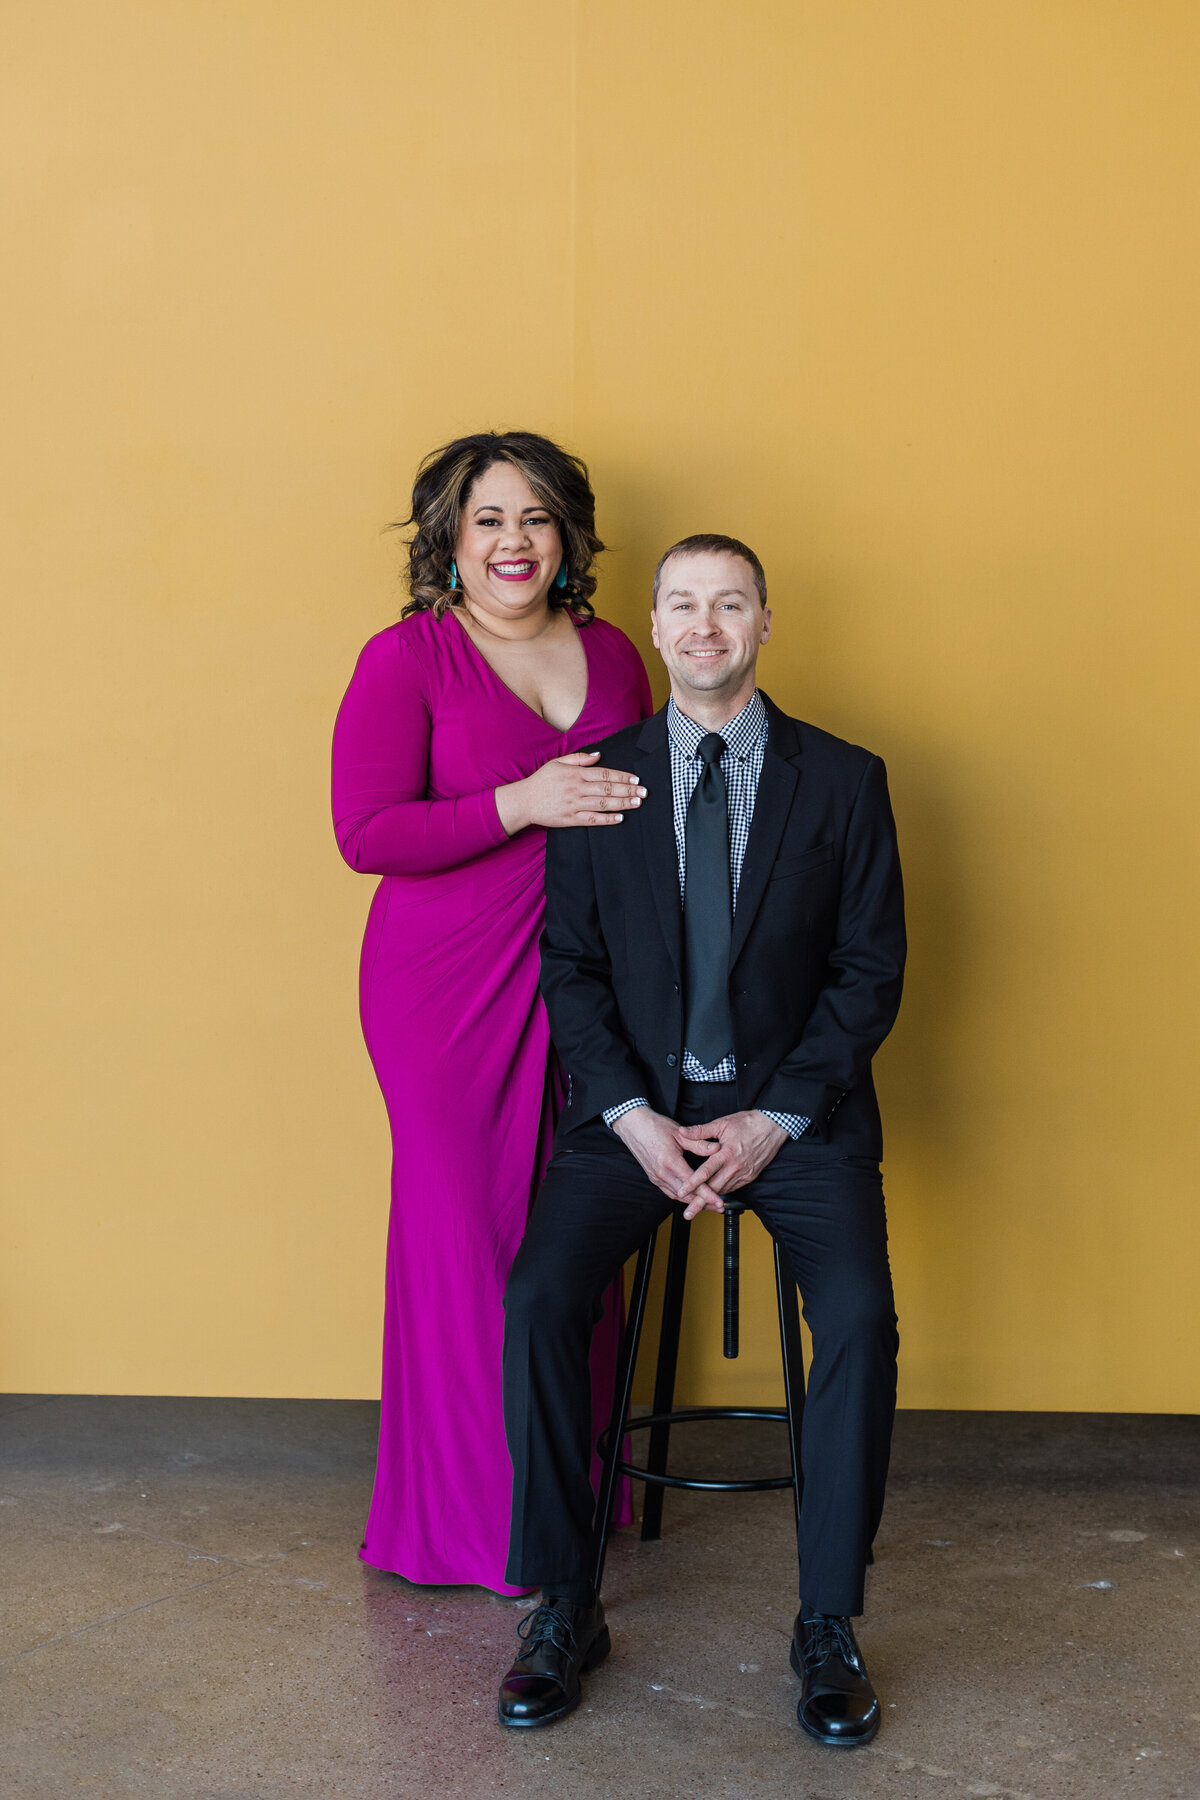 A couple posing together in front of a dark yellow background during their studio engagement session in Dallas, Texas. The woman on the right is standing and is wearing a purple dress. The man on the right is seated on a stool and is wearing a dark suit with a tie.